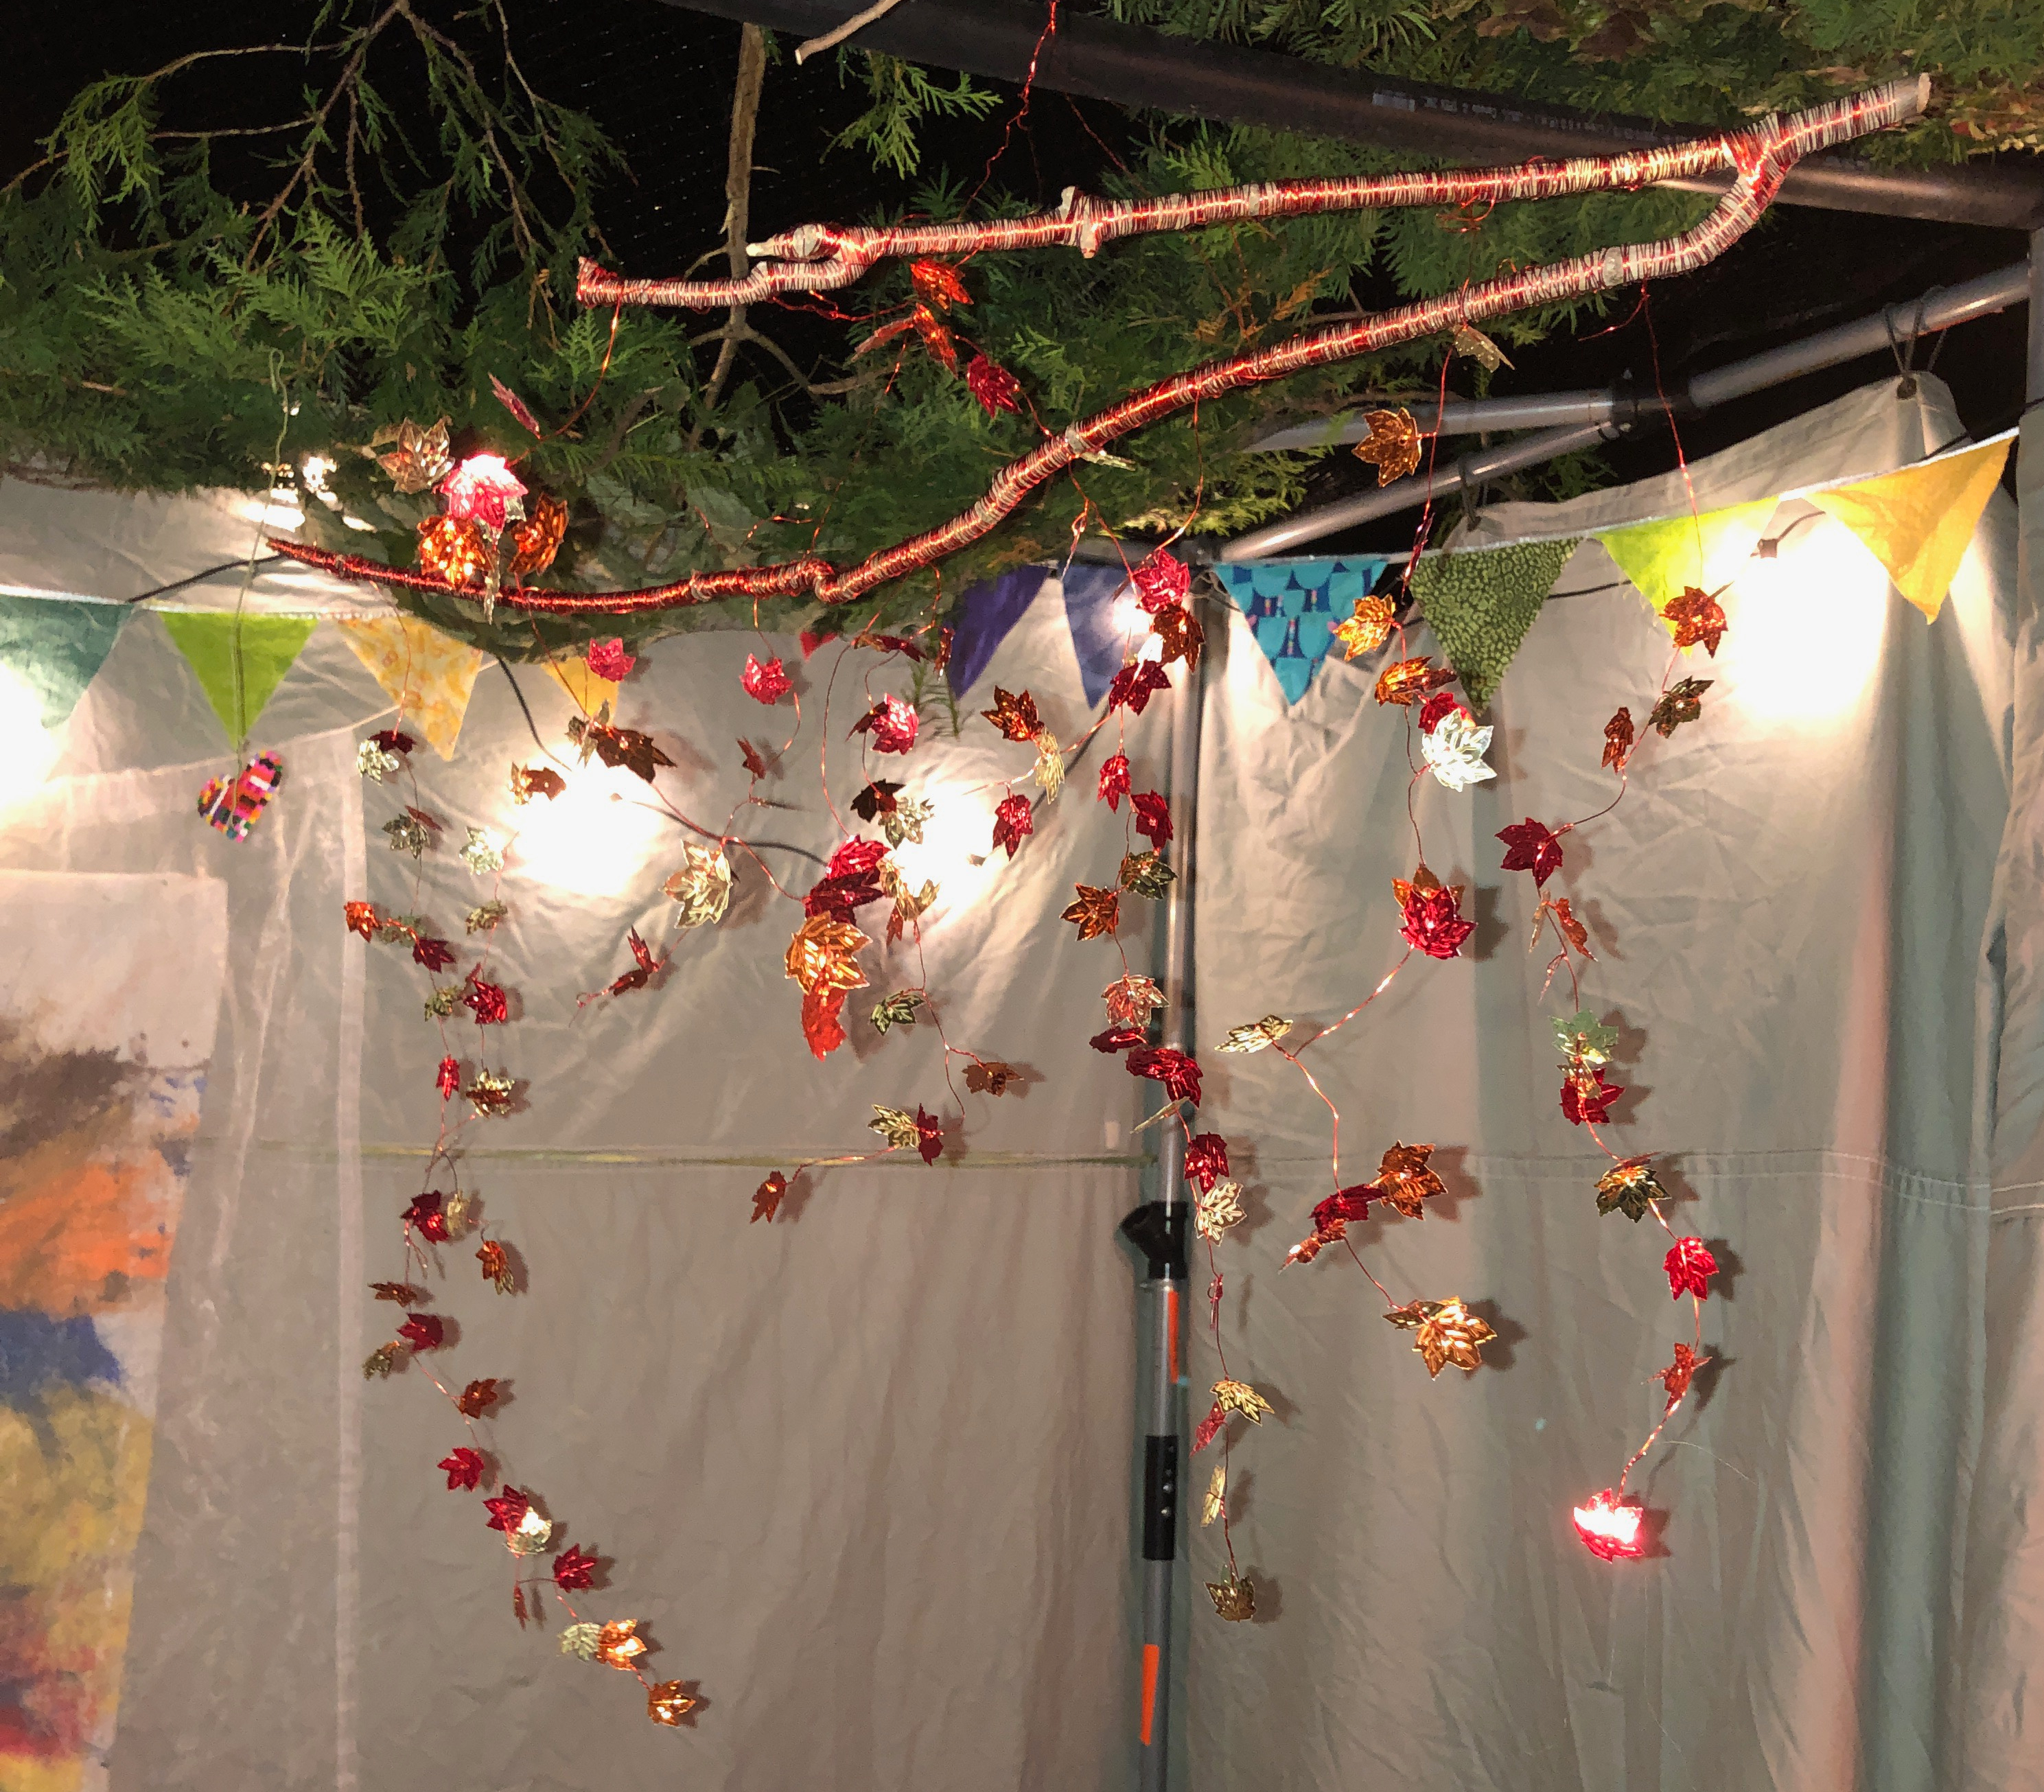 Decorative mobile made of a tree branch, with foil confetti shaped like maple leaves strung on wires that hang from the branches.